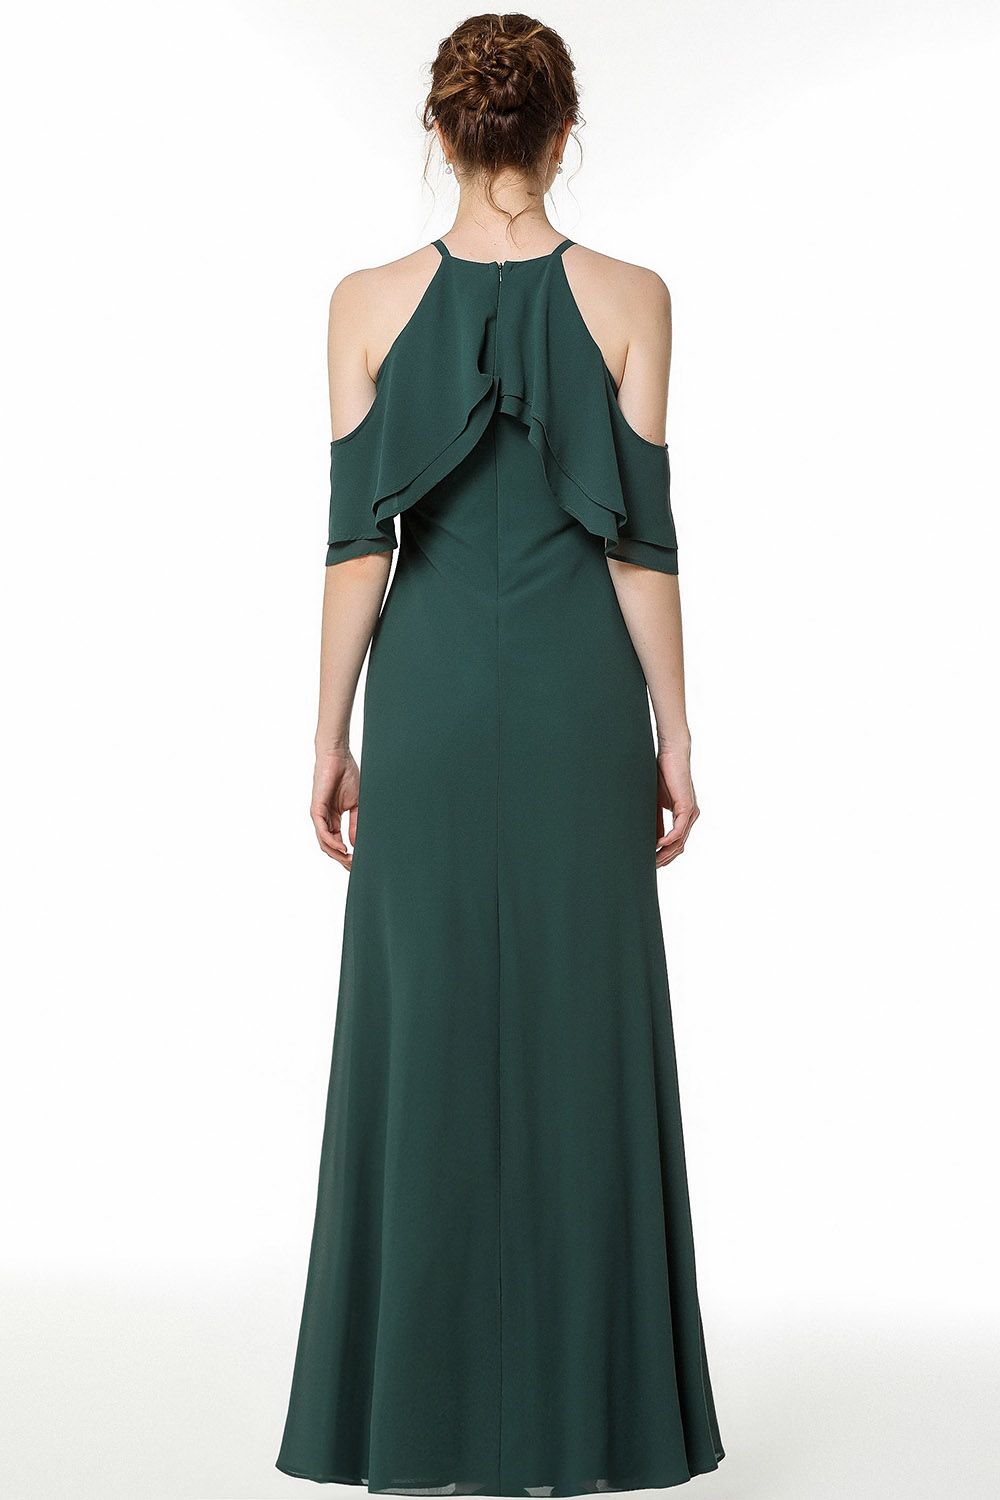 Load image into Gallery viewer, Affordable Cold-shoulder Ruffle Dark Green Bridesmaid Dresses Online-27dress
